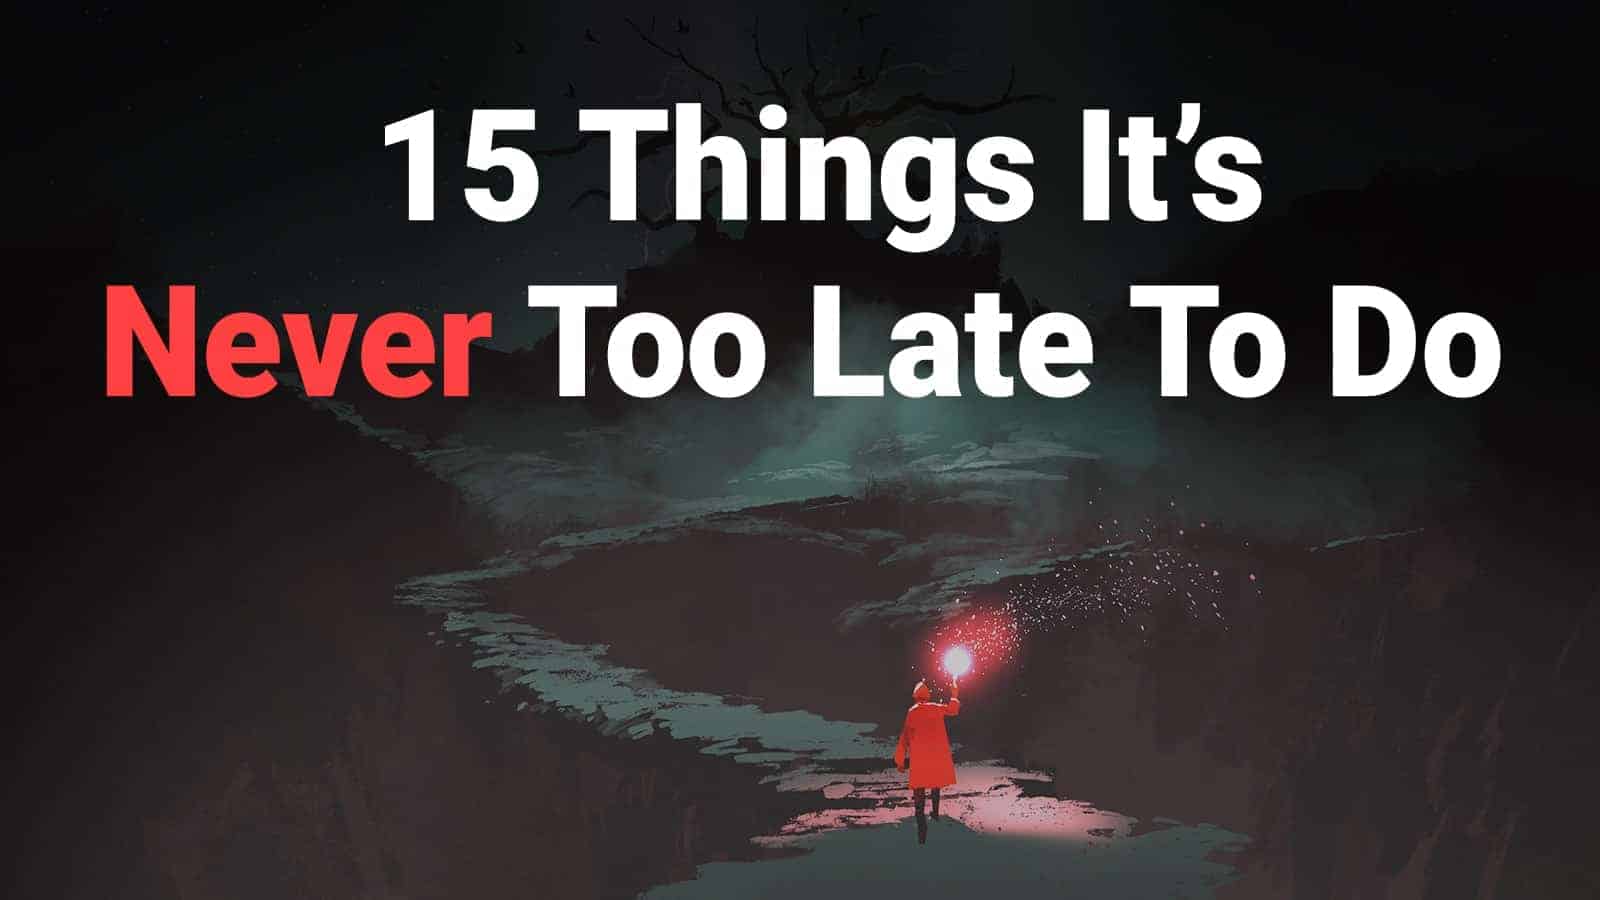 15 Things It’s Never Too Late To Do